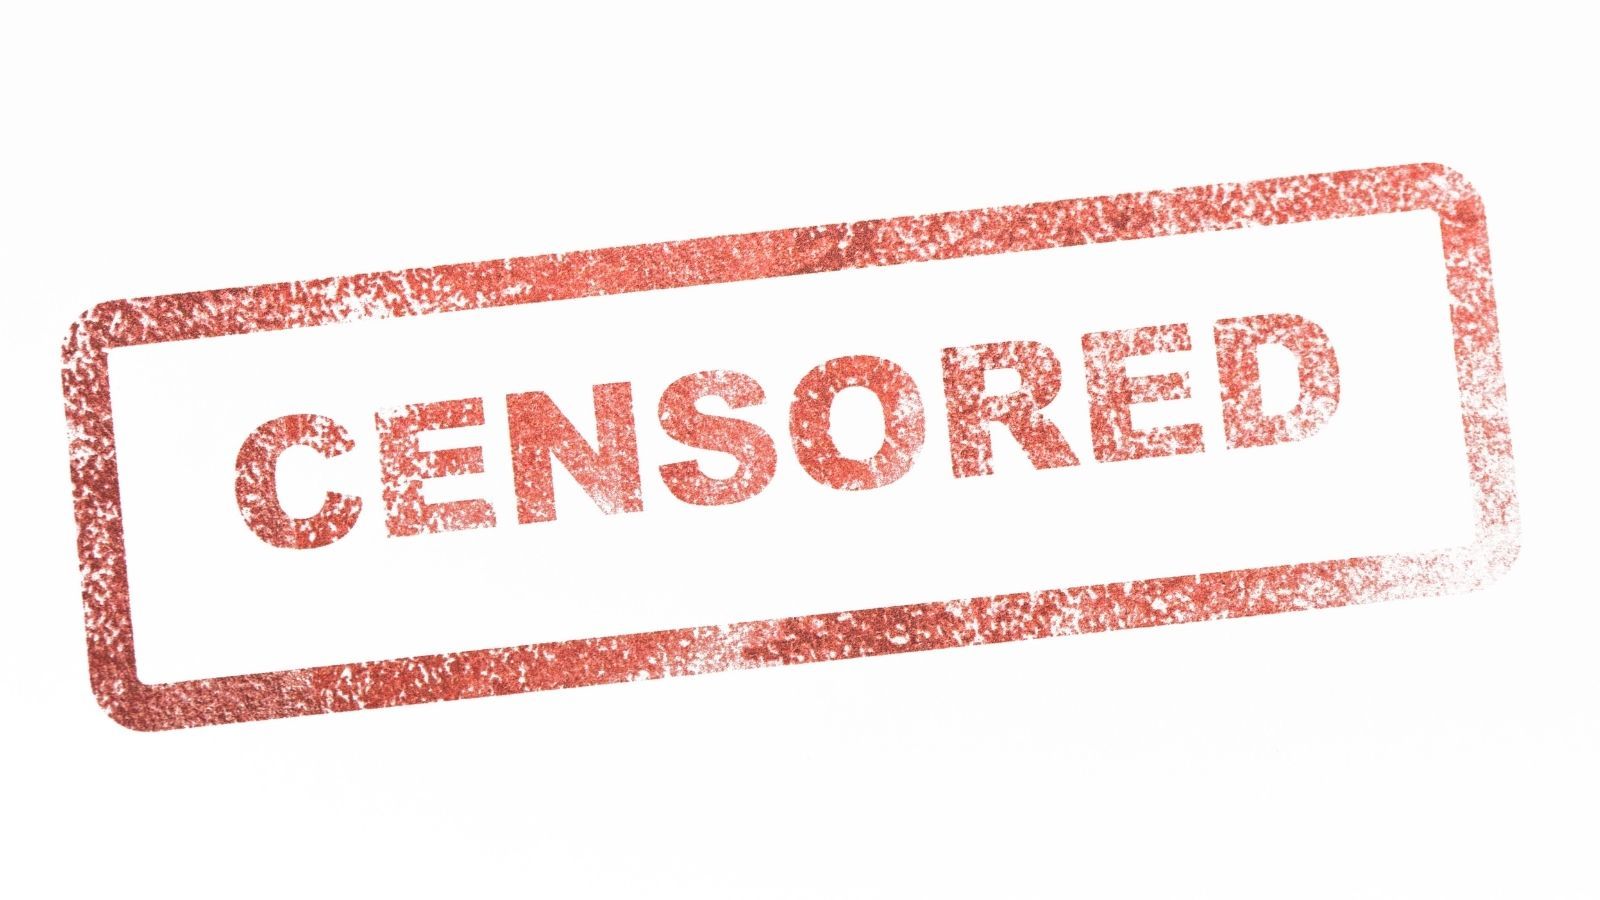 Soft and Quiet: Self-Censorship In An Era of Book Challenges | Book Riot